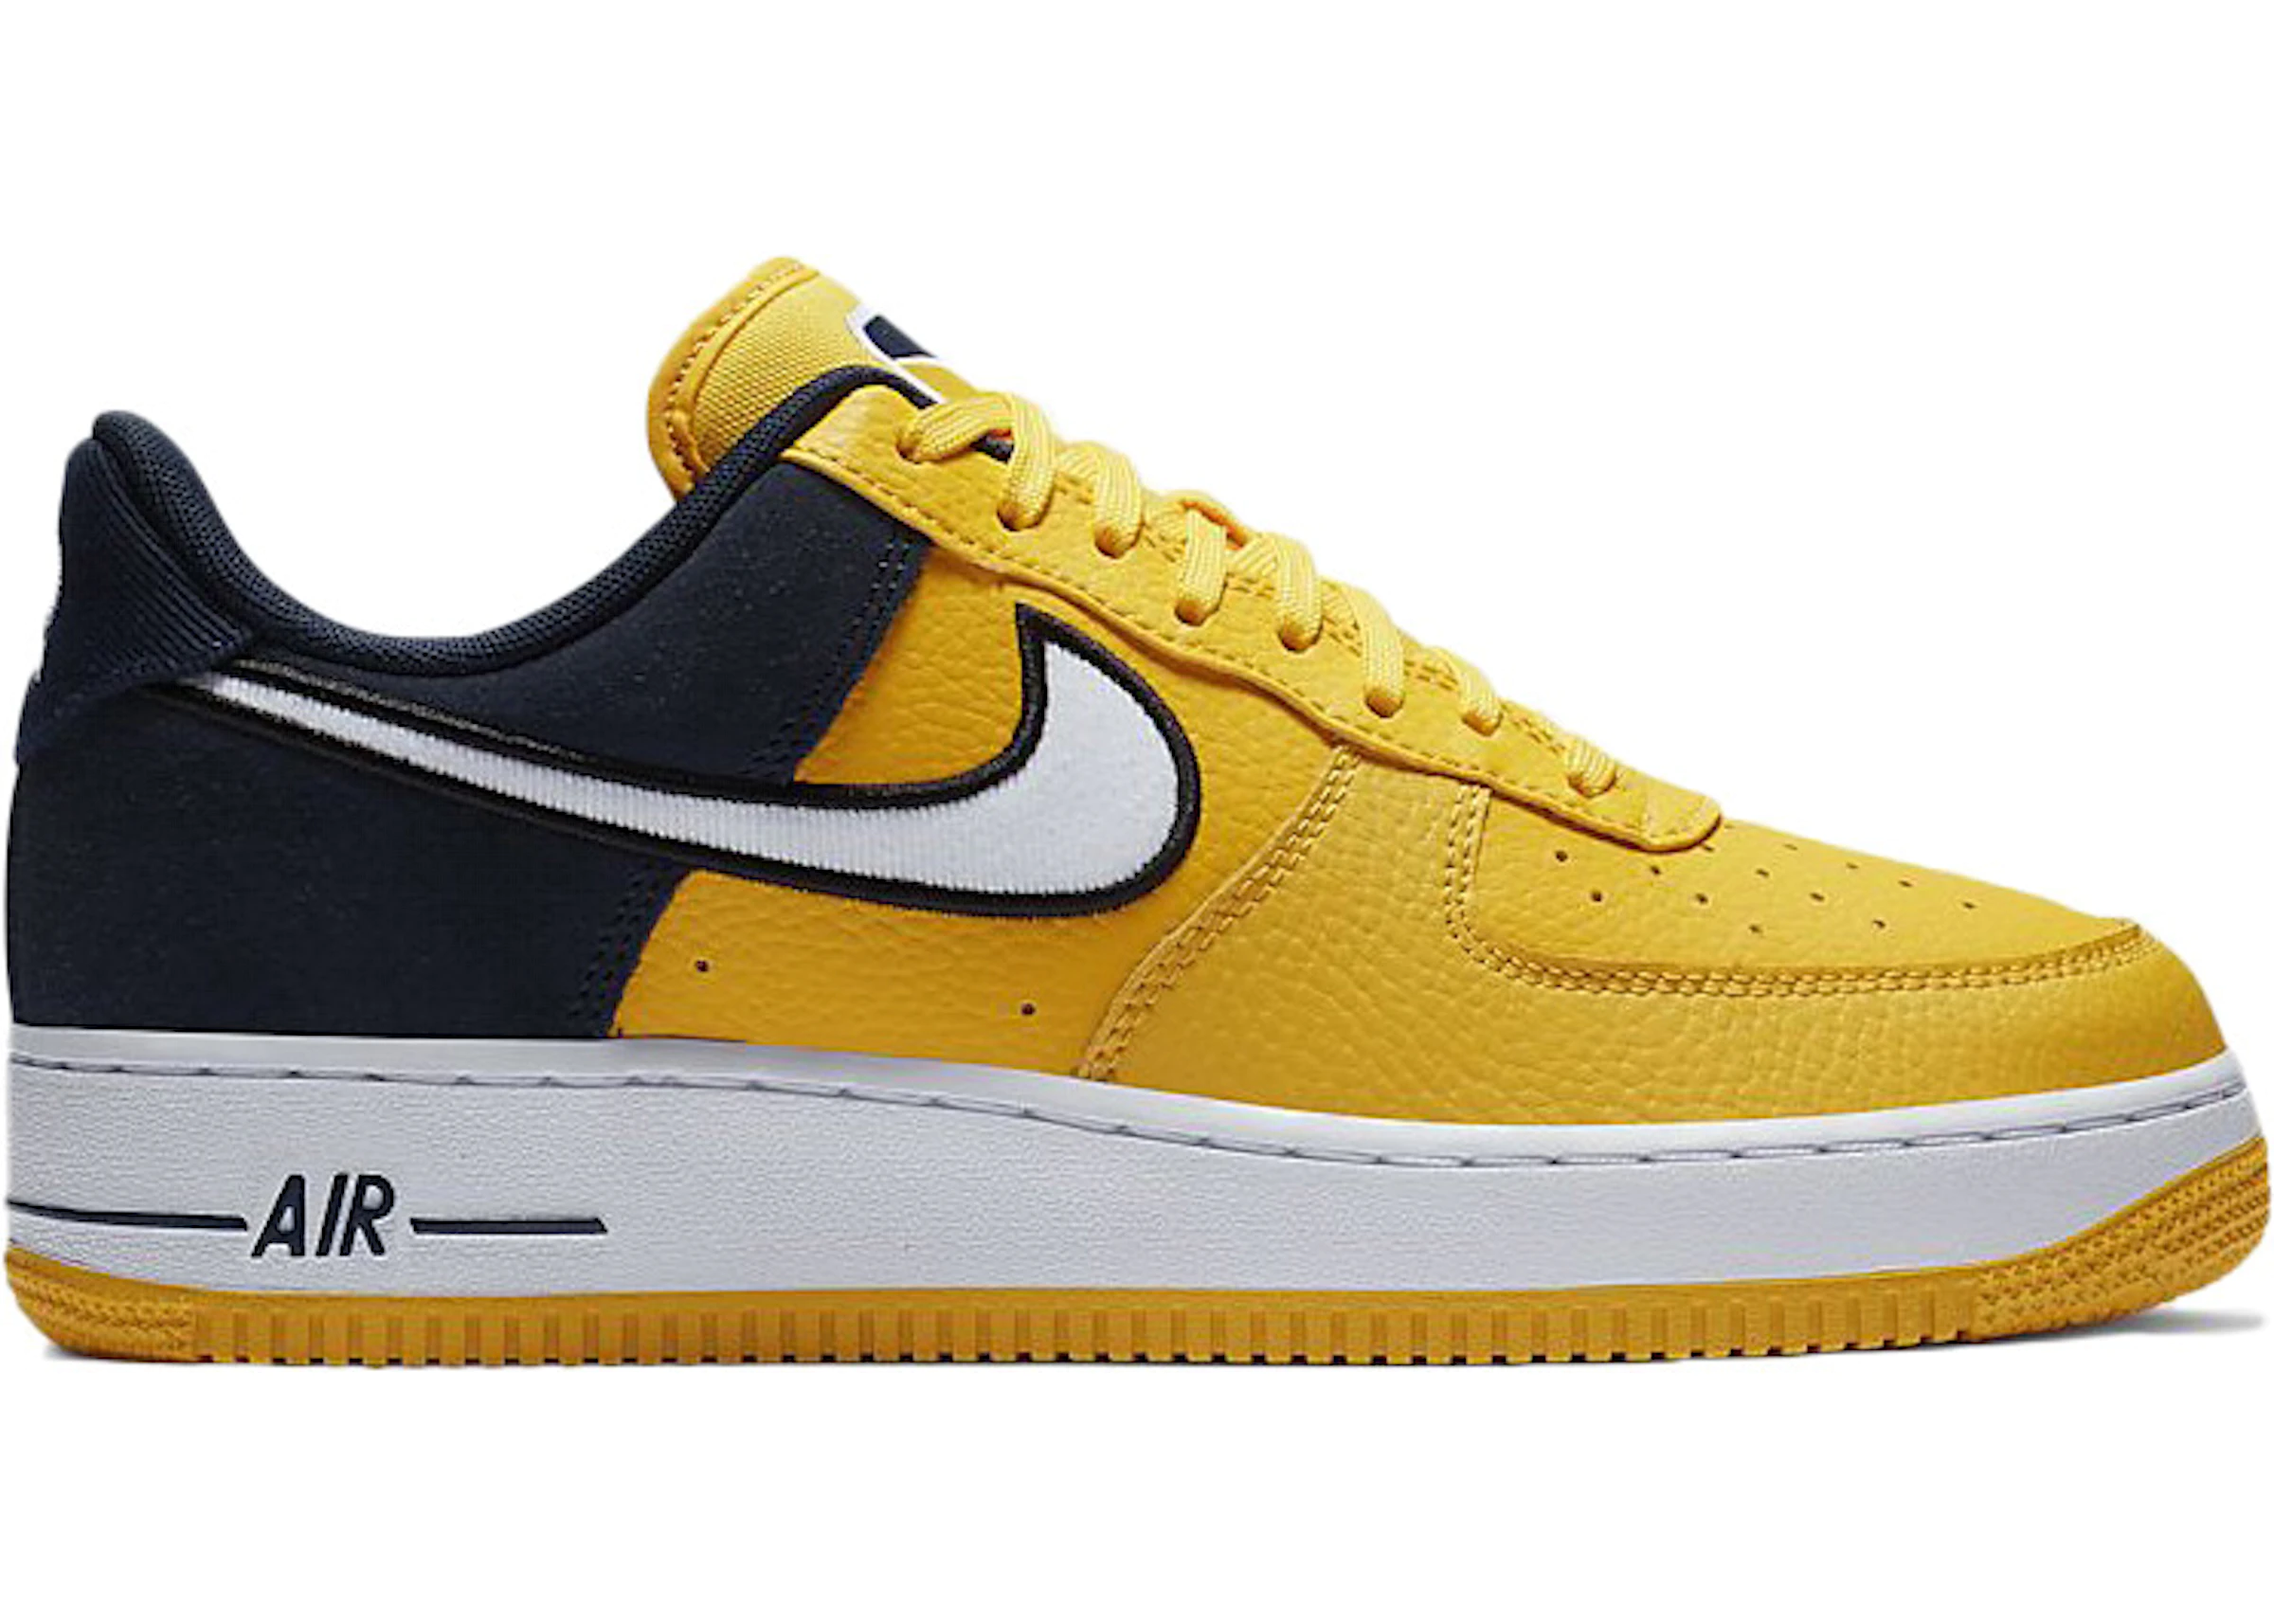 scarf Impolite Compliance to Nike Air Force 1 Low '07 LV8 1 Amarillo - AO2439-700 - US